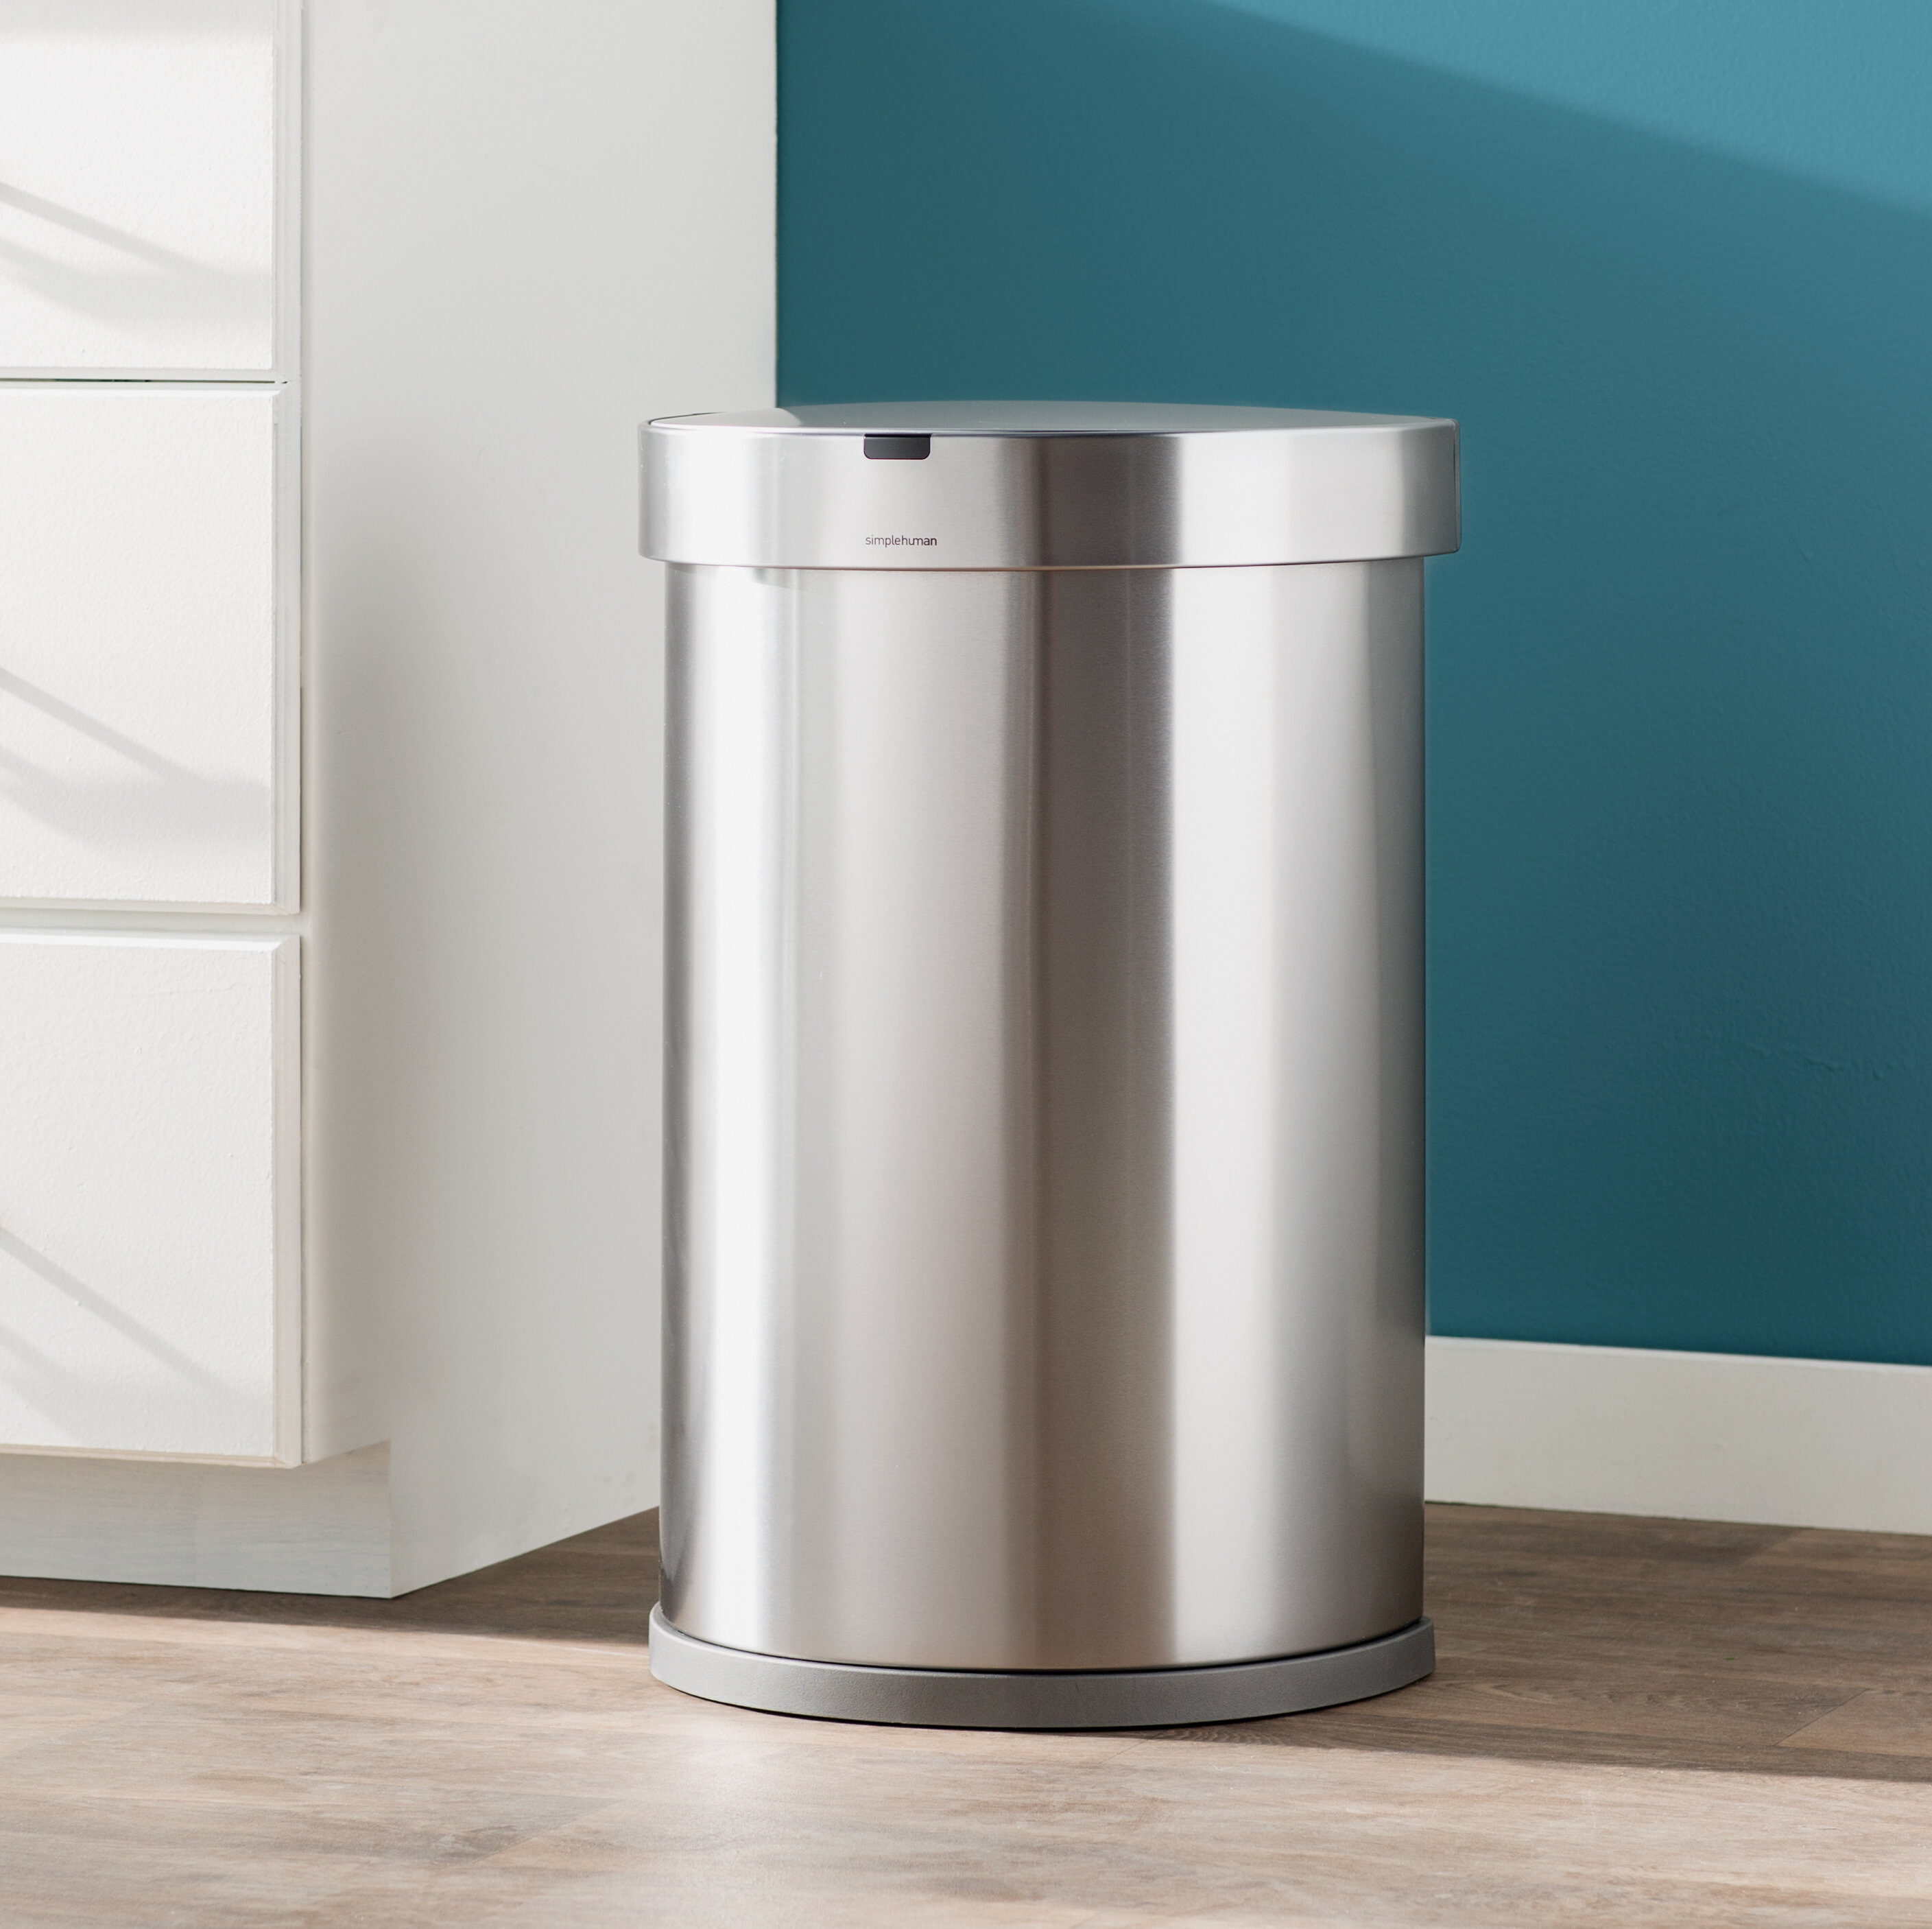 Touchless Automatic Brushed Stainless Steel with Grey Plastic Lid Trash can 12 Gallon Semi-Round Sensor simplehuman 45 Liter